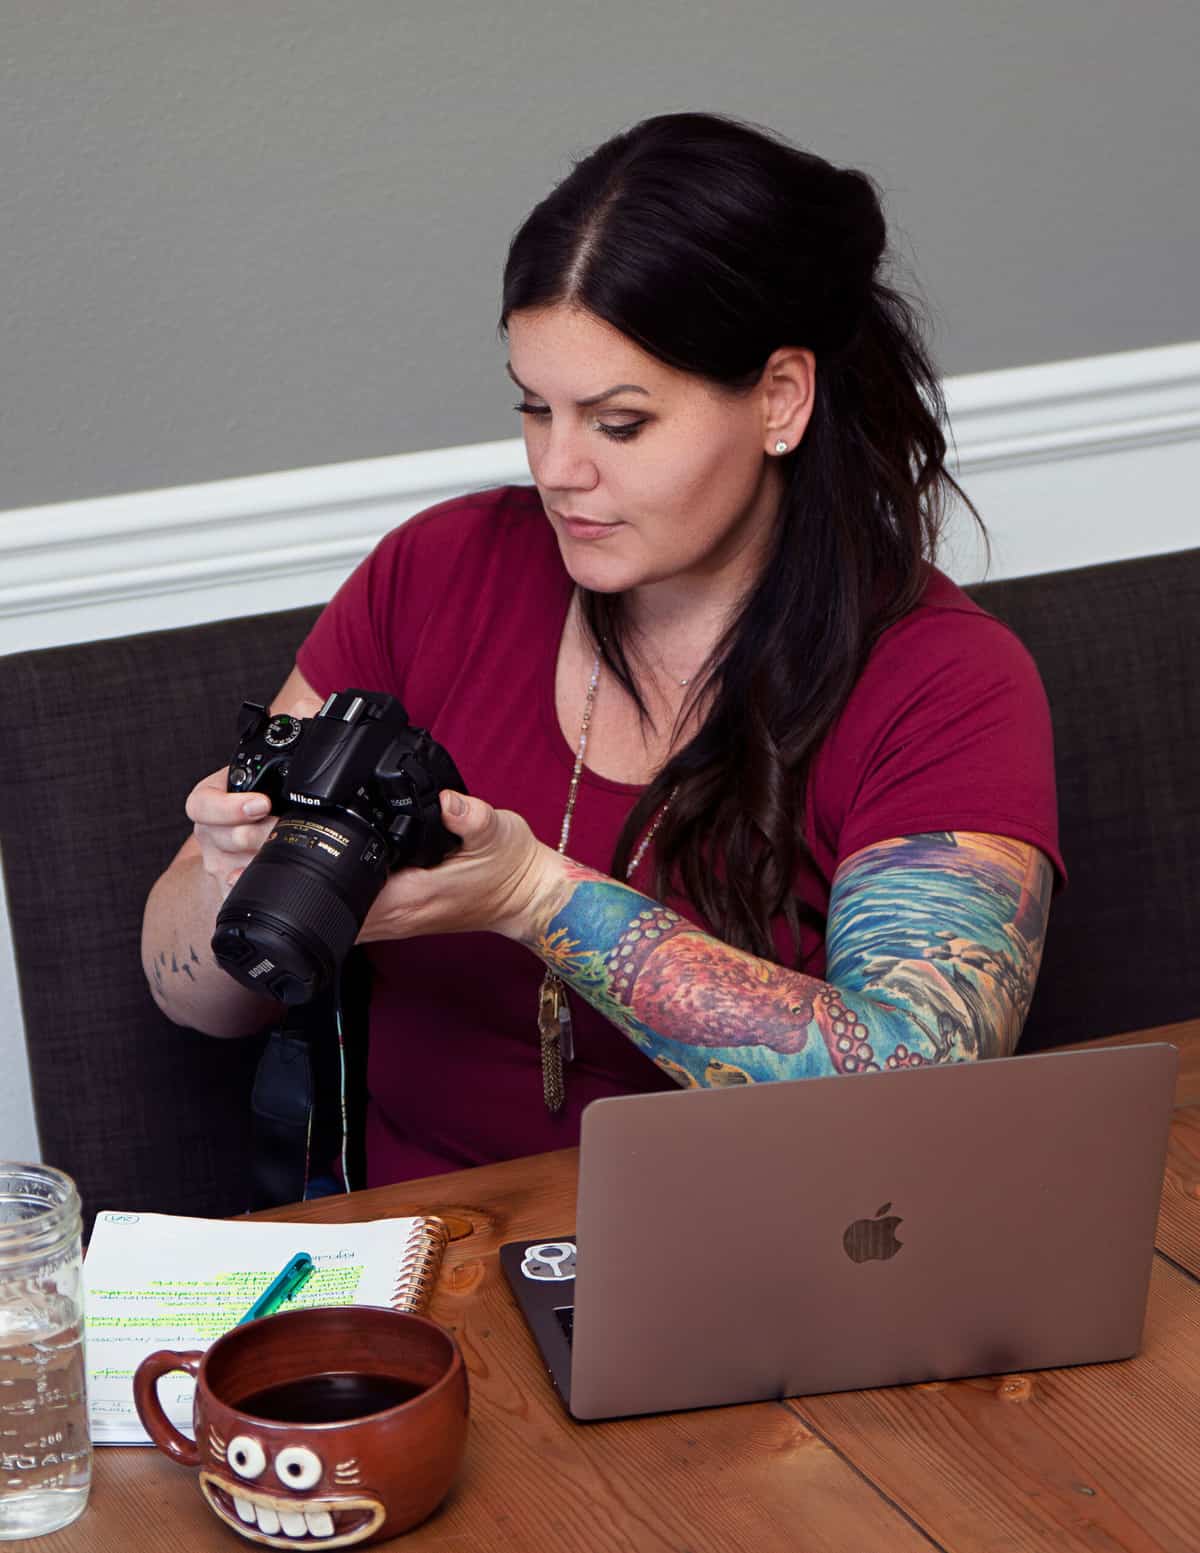 woman with long dark hair, wearing a red shirt, looking at pictures on her camera